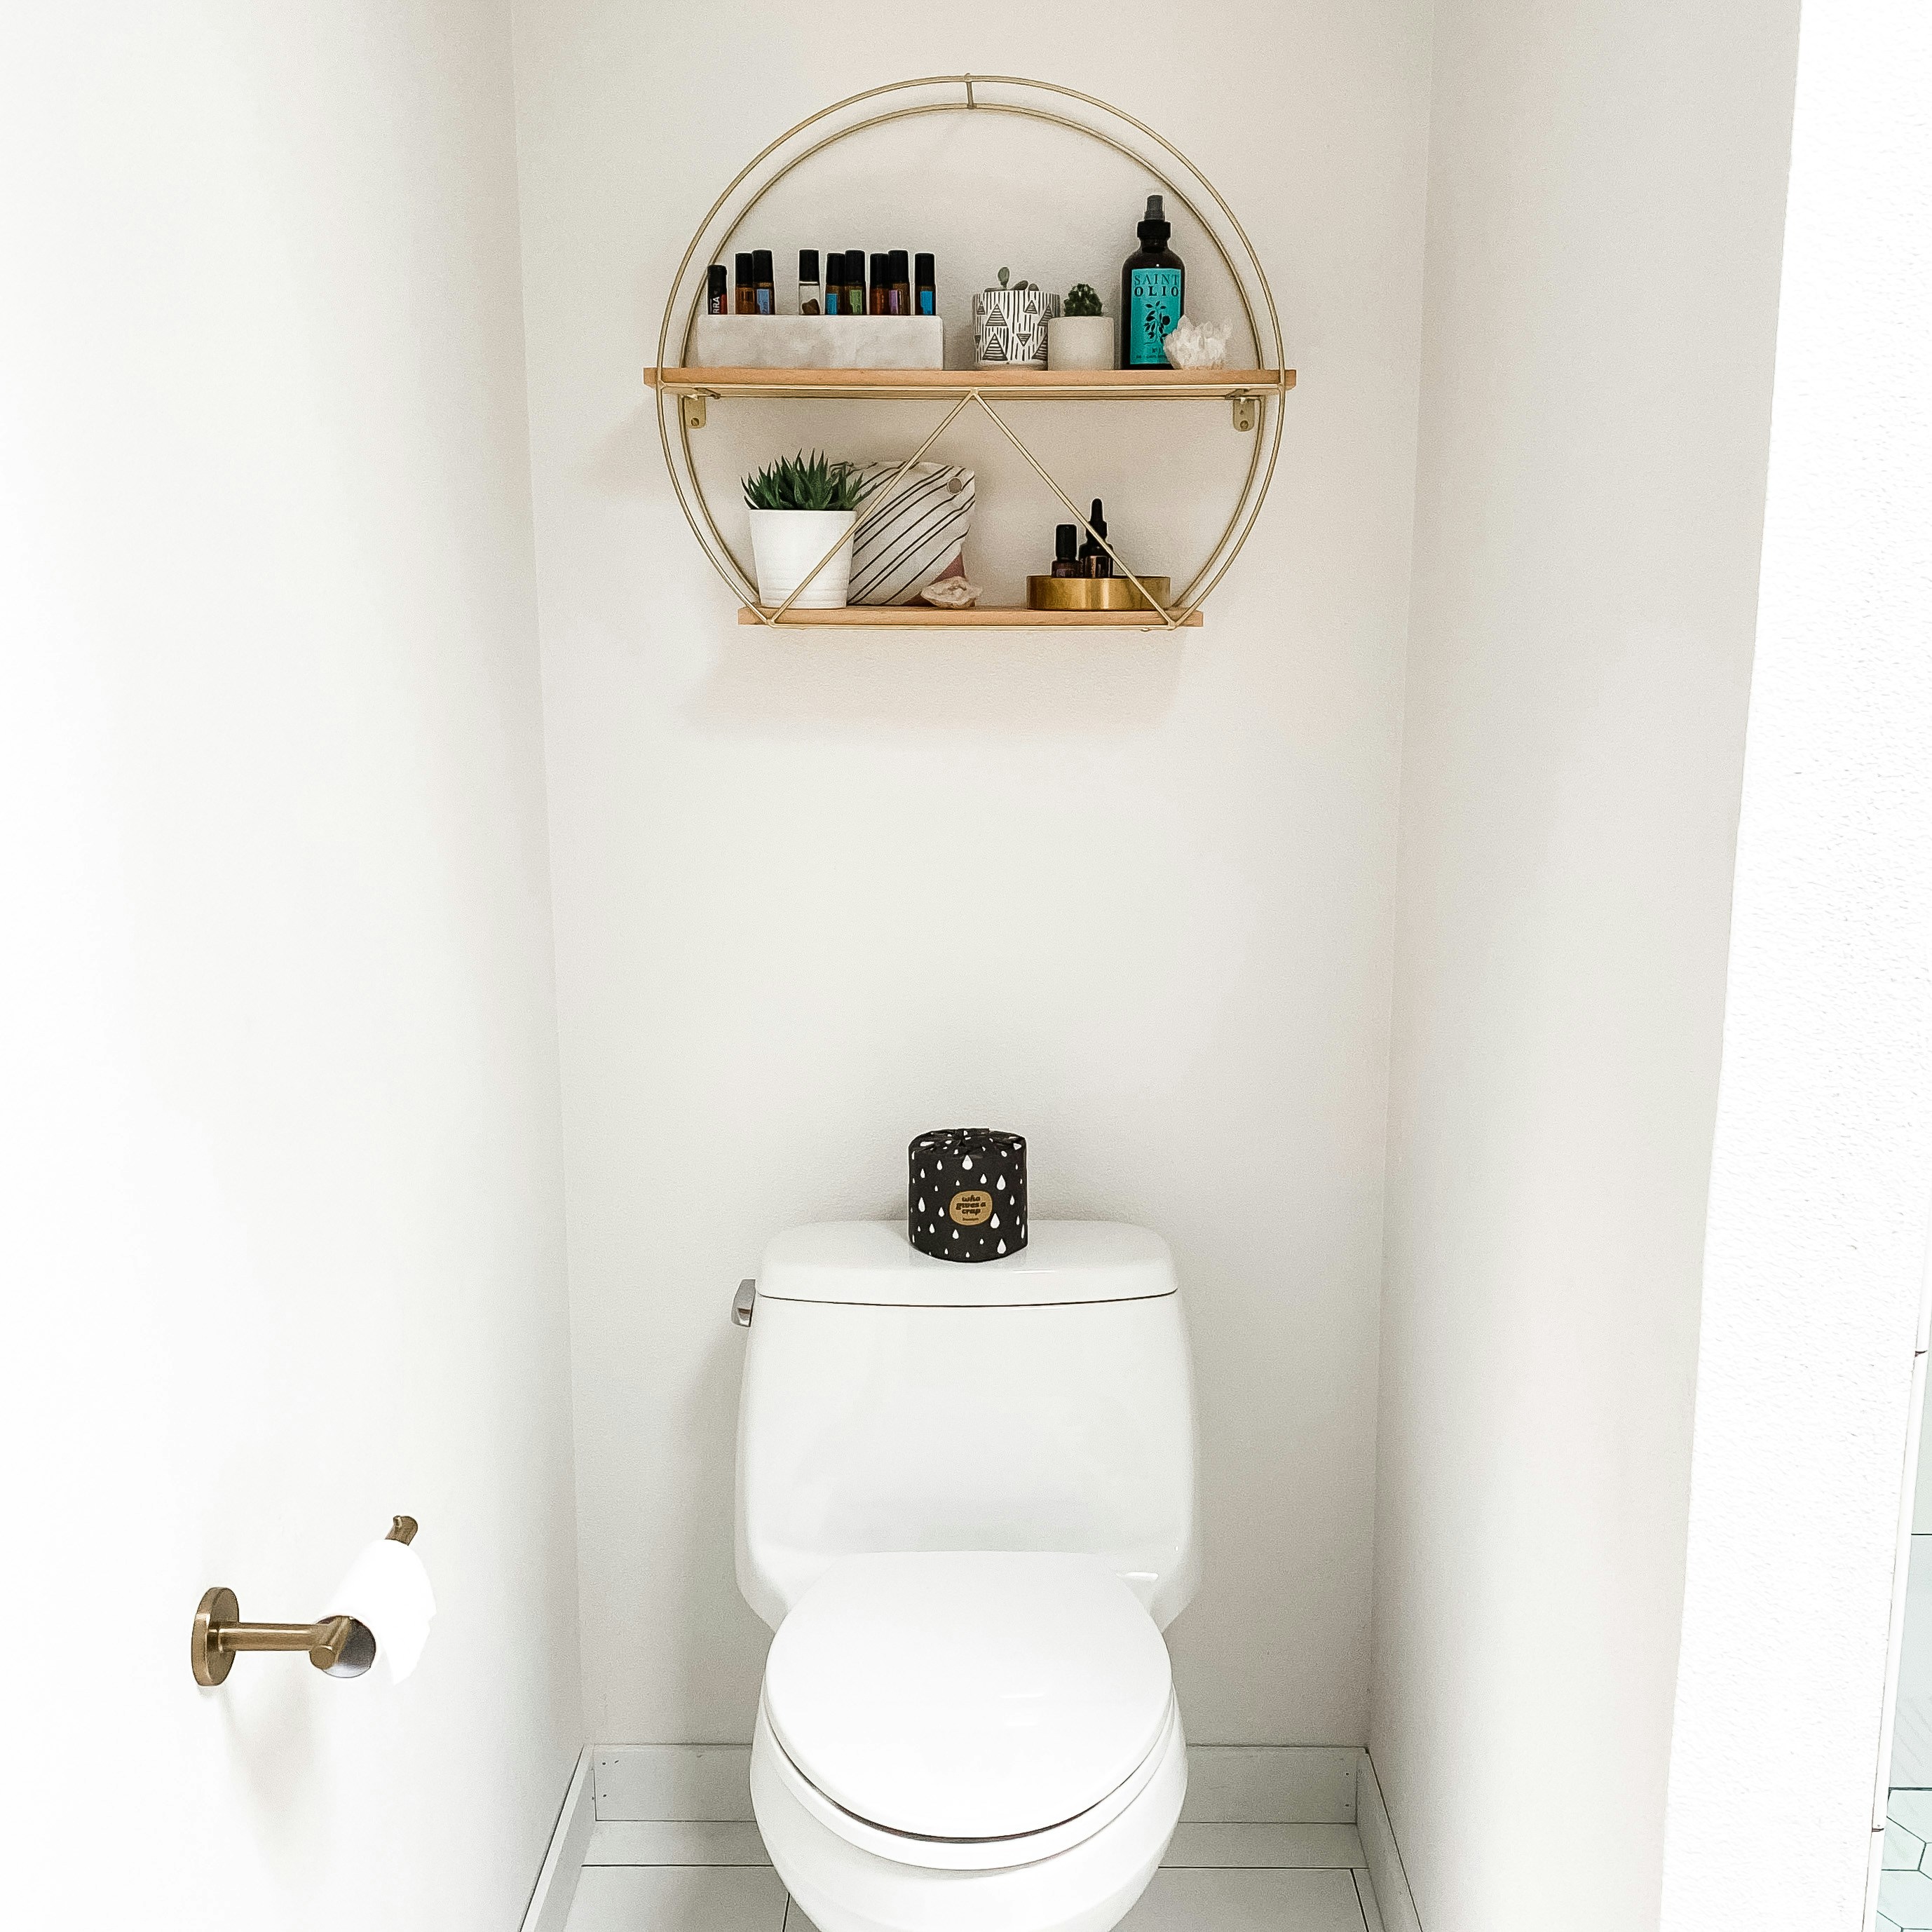 Smart toilet seat with health monitoring features.